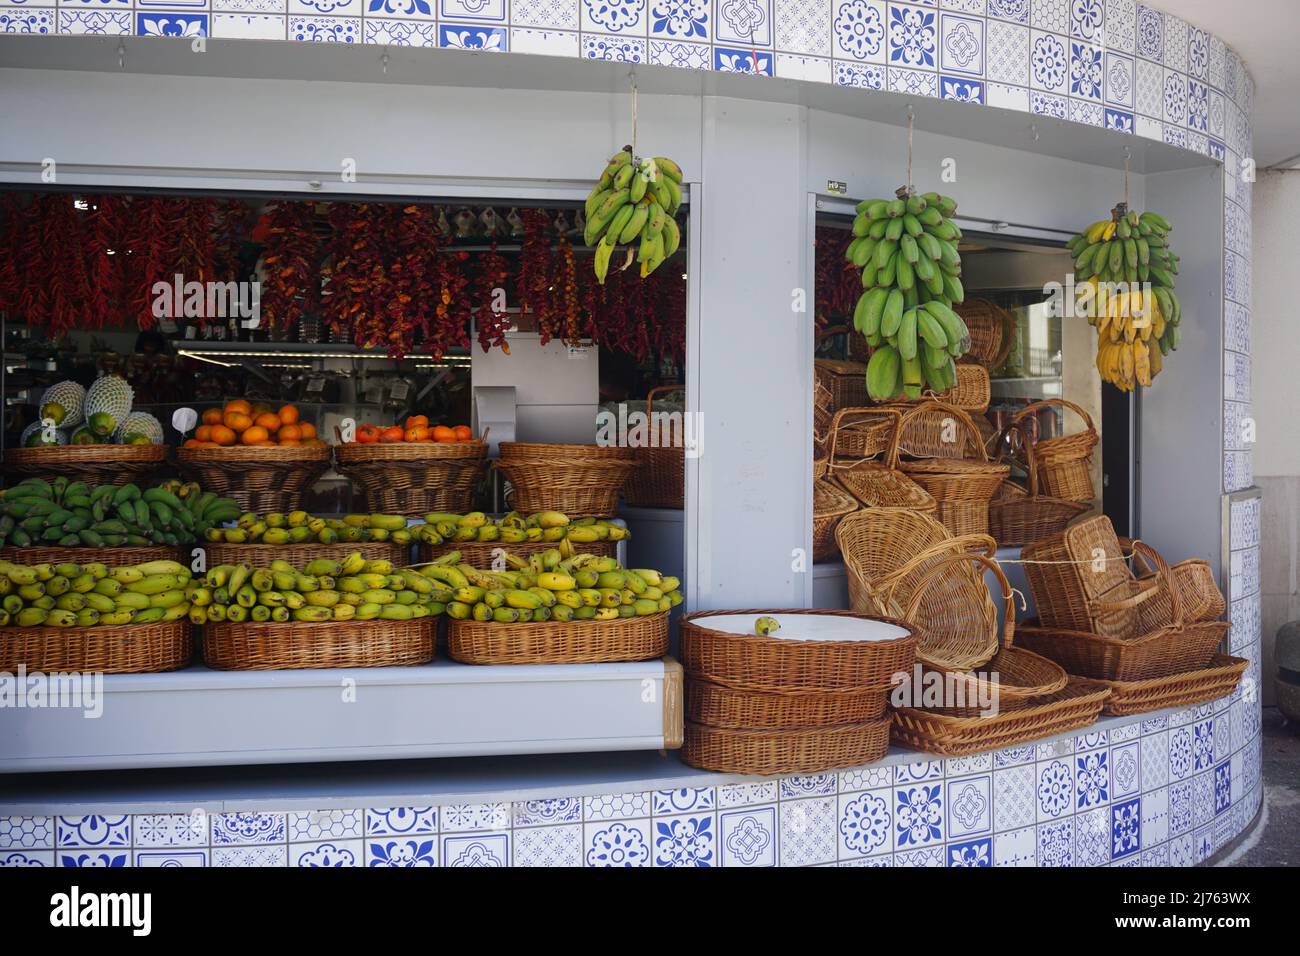 External view of a local fruit and wicker baskets shop in Funchal, madeira, Portugal, Europe Stock Photo